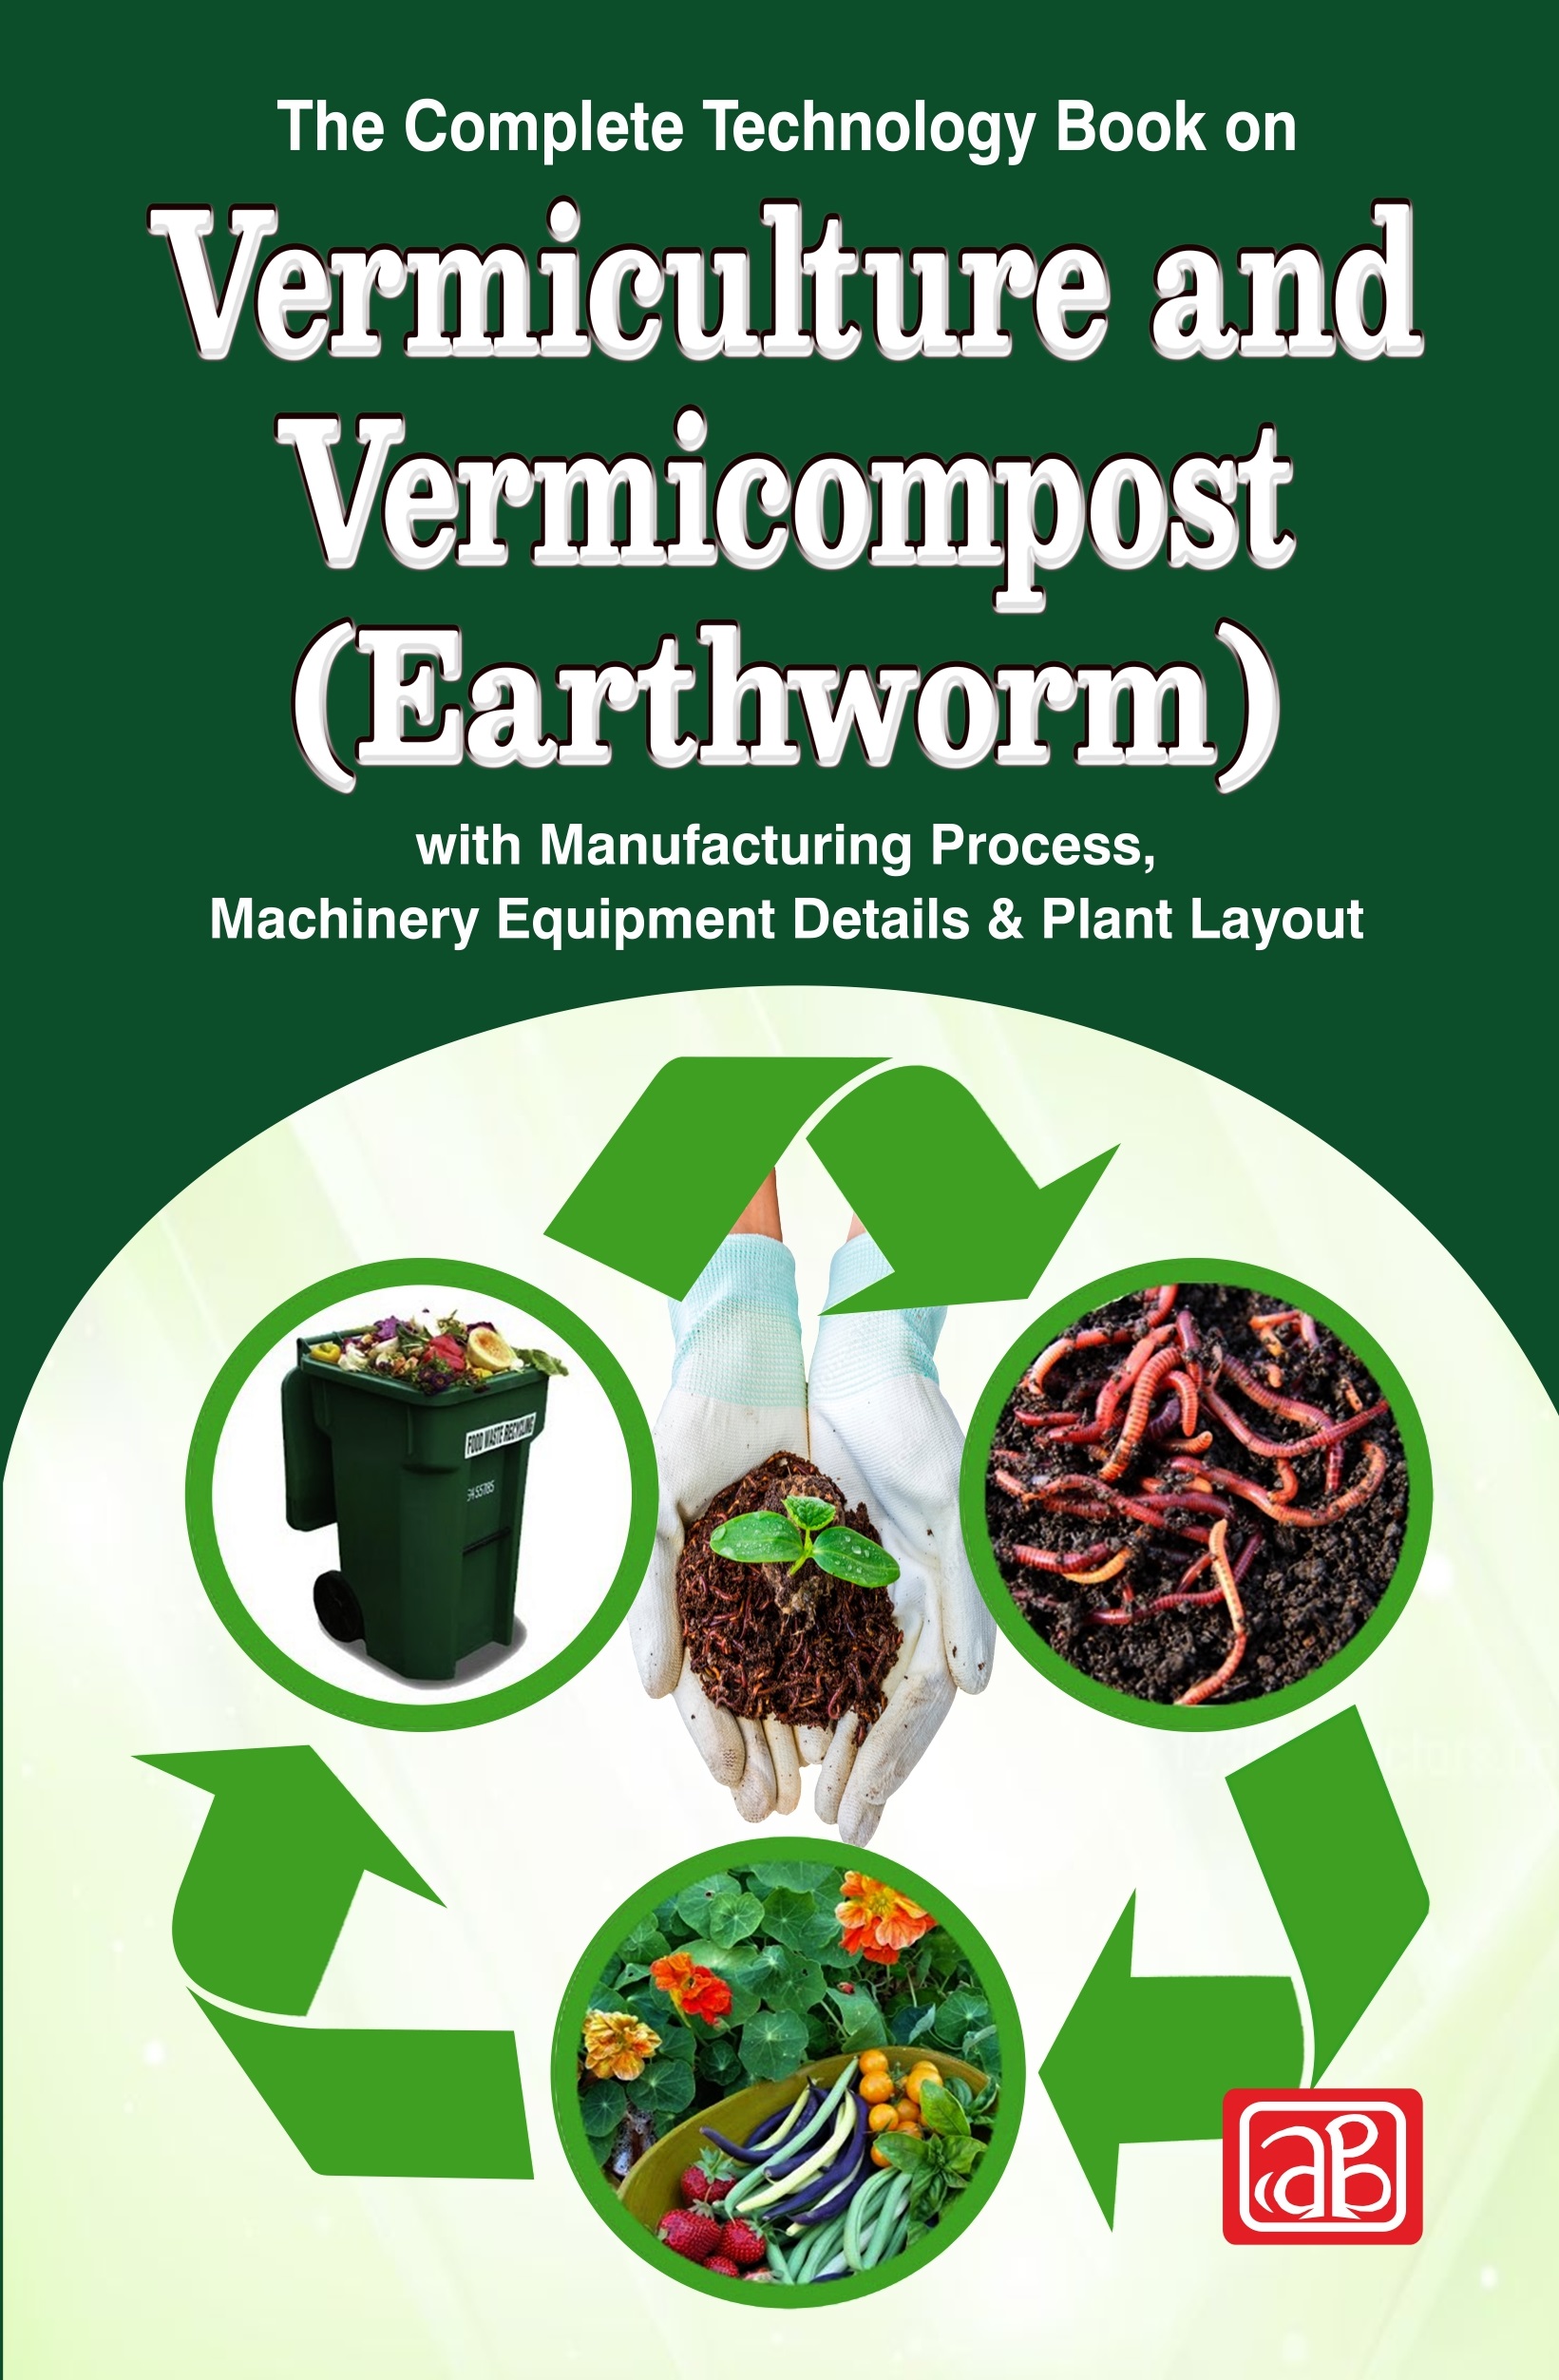 The Complete Technology Book on Vermiculture and Vermicompost (Earthworm) with Manufacturing Process, Machinery Equipment Details & Plant Layout_2nd Edition